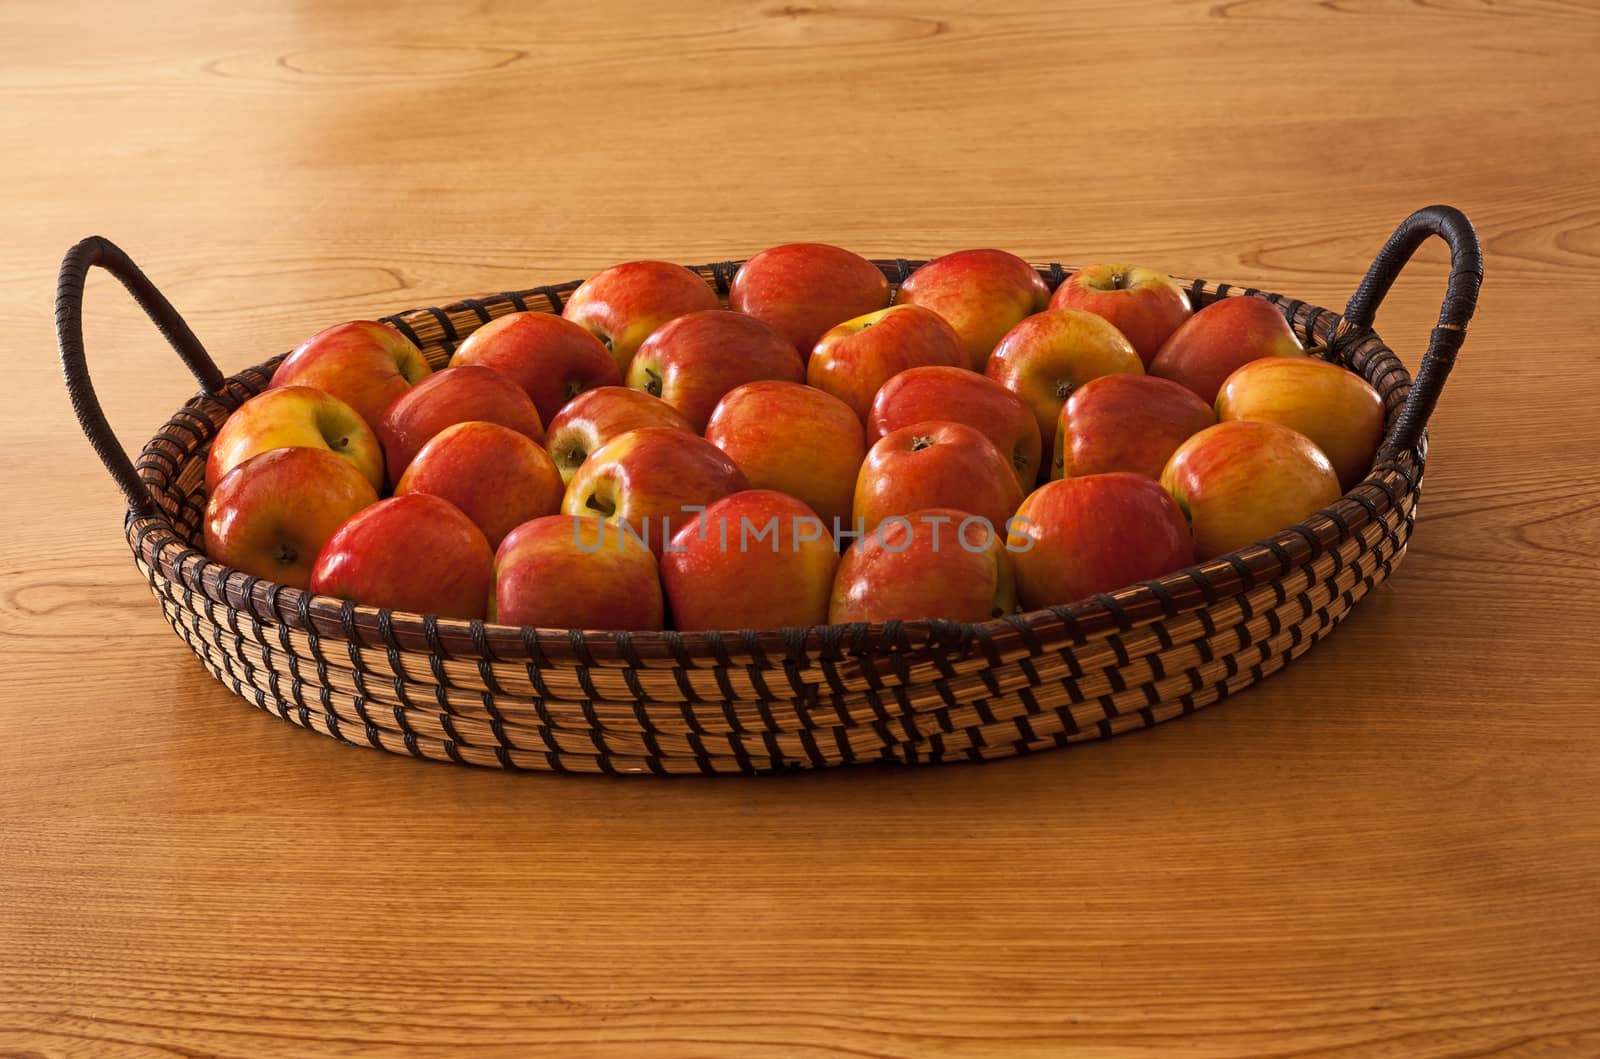 Still life image of a basket of freshly picked apples.